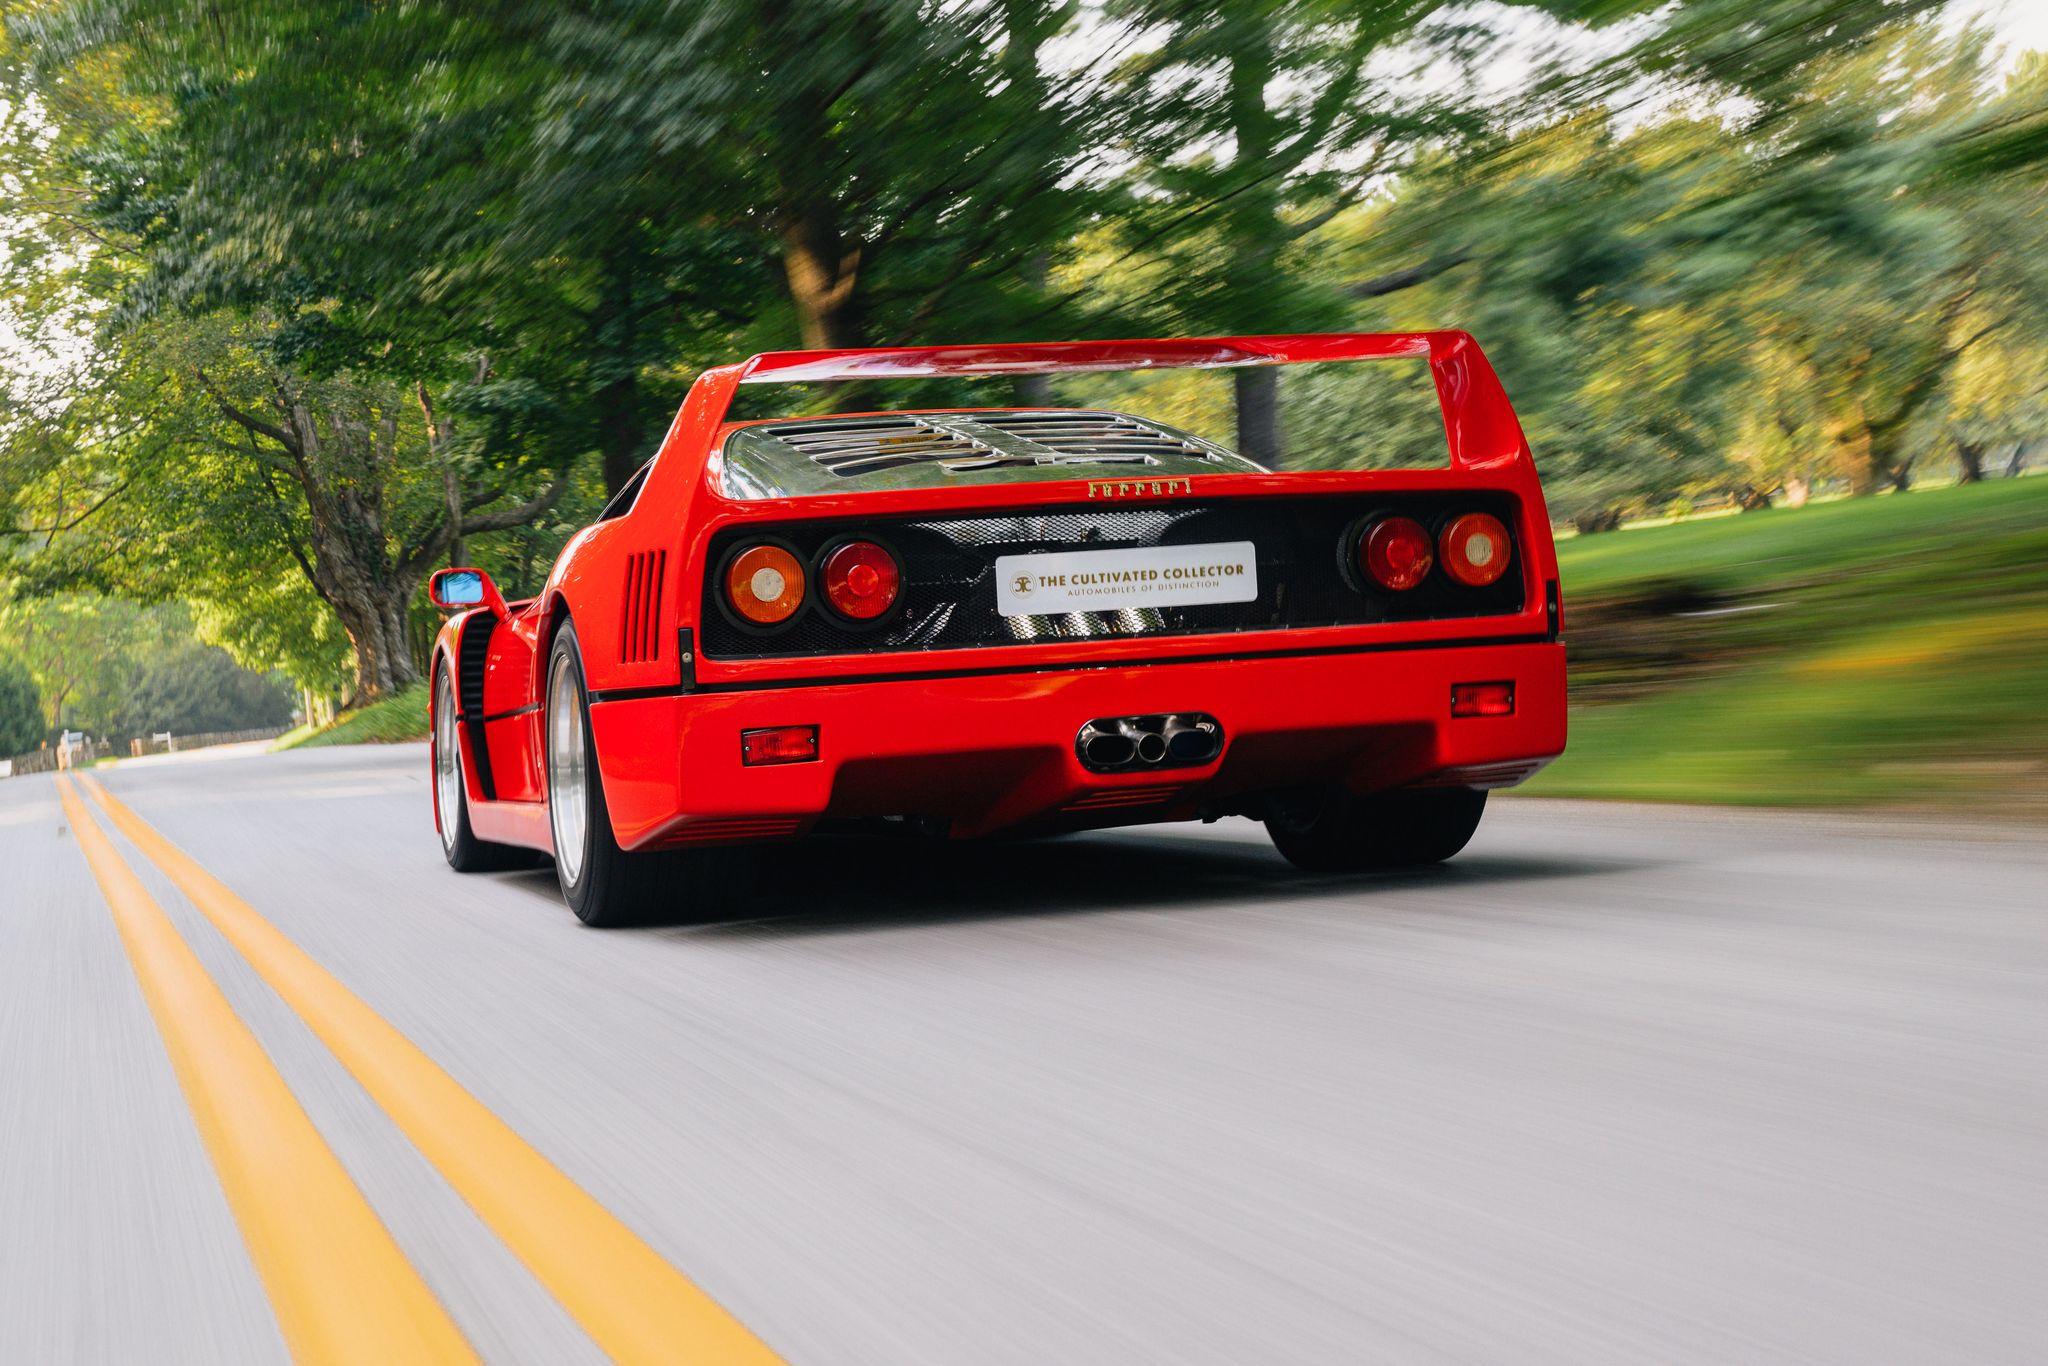 Nothing Can Prepare You for the Pure Joy of a Ferrari F40